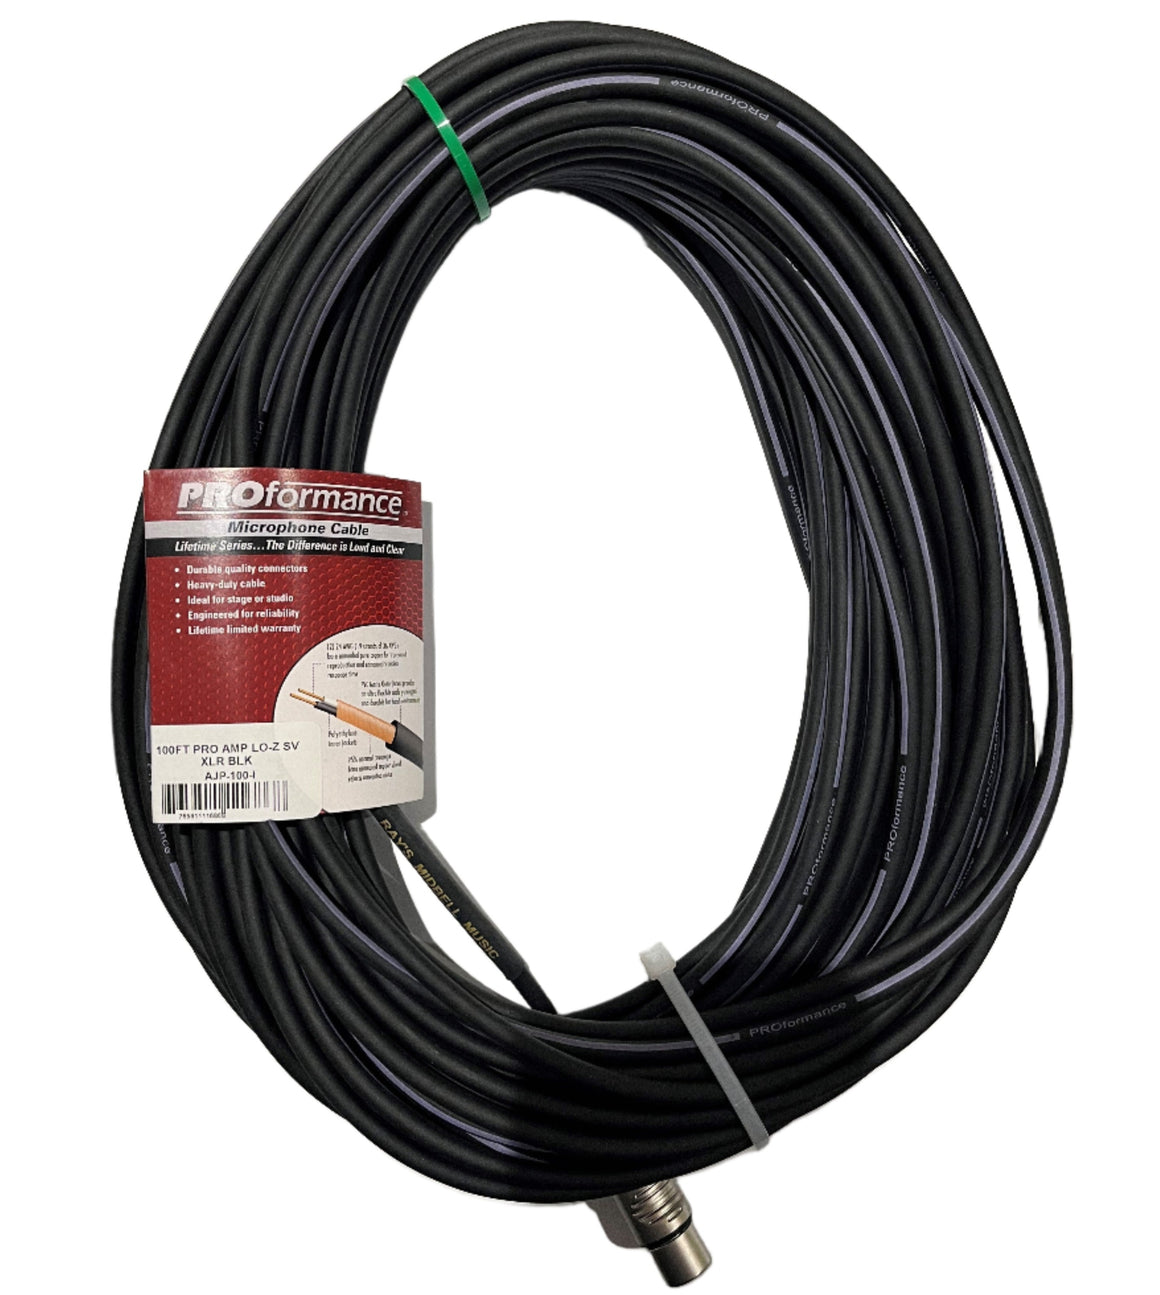 PROformance AJP100 100' Microphone Cable